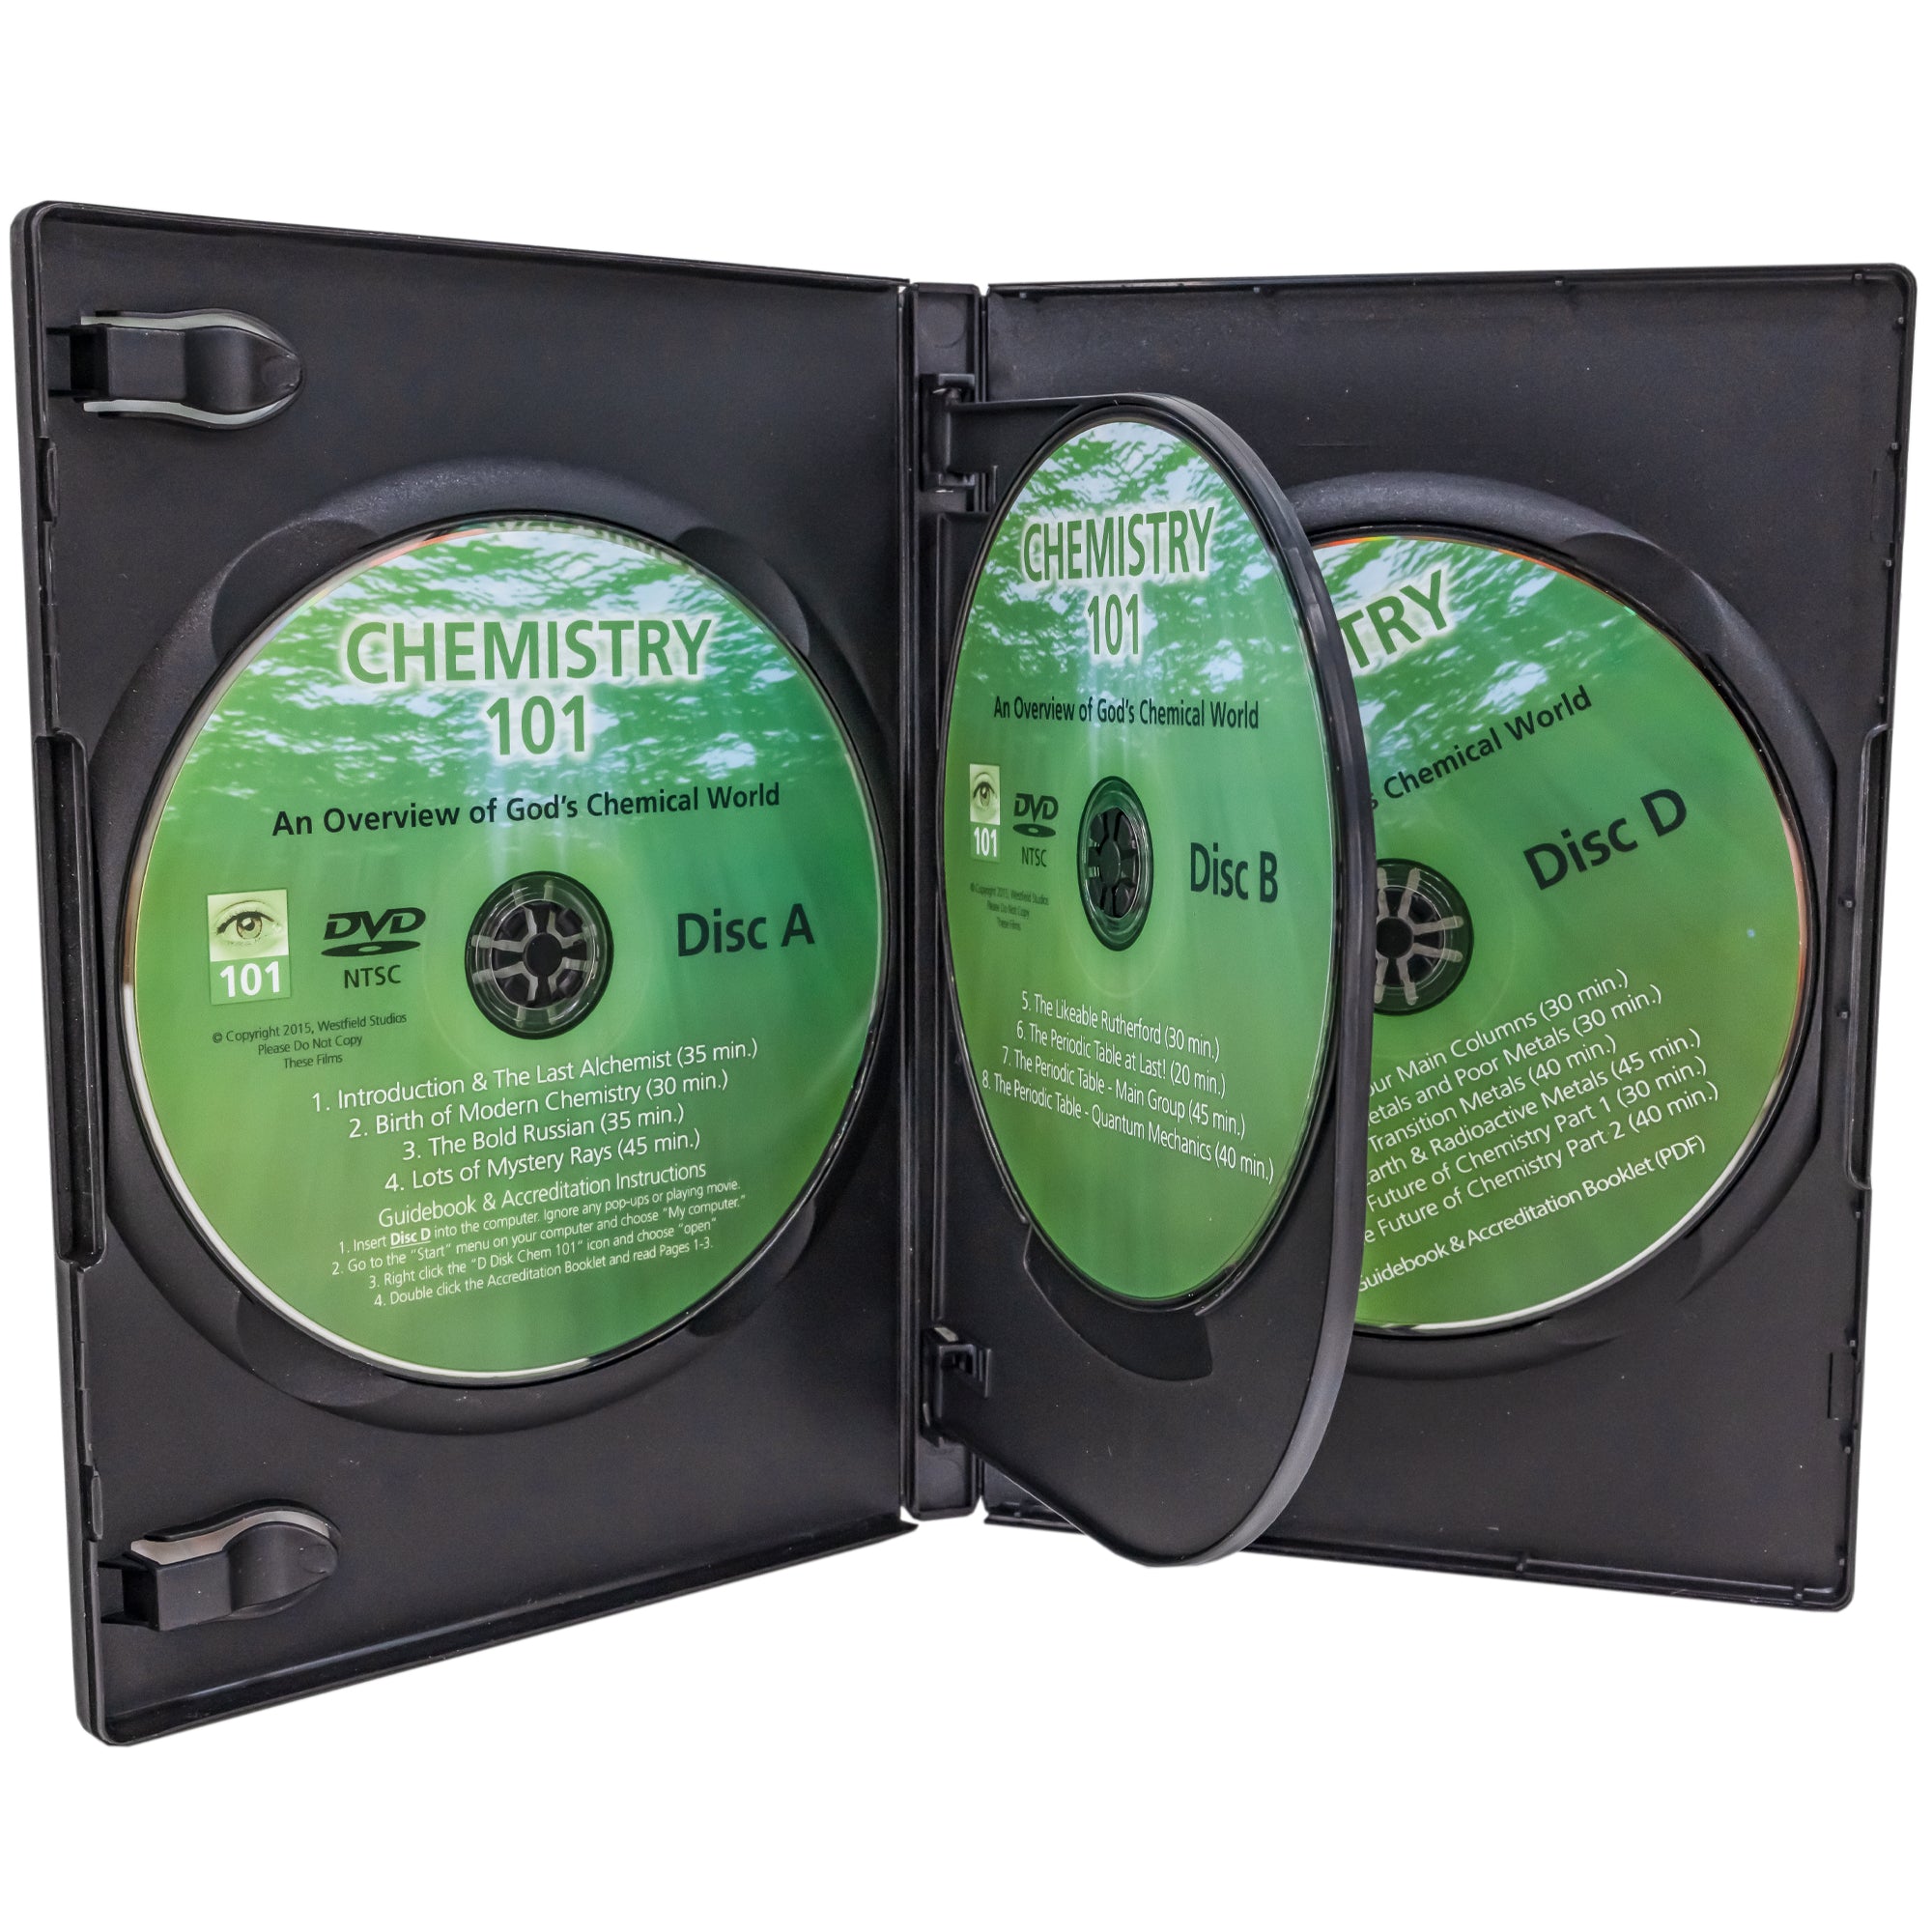 Chemistry 101 DVD case open to show the discs inside. There are 2 discs on the walls of the case, and 2 attached to an insert in the middle of the case.